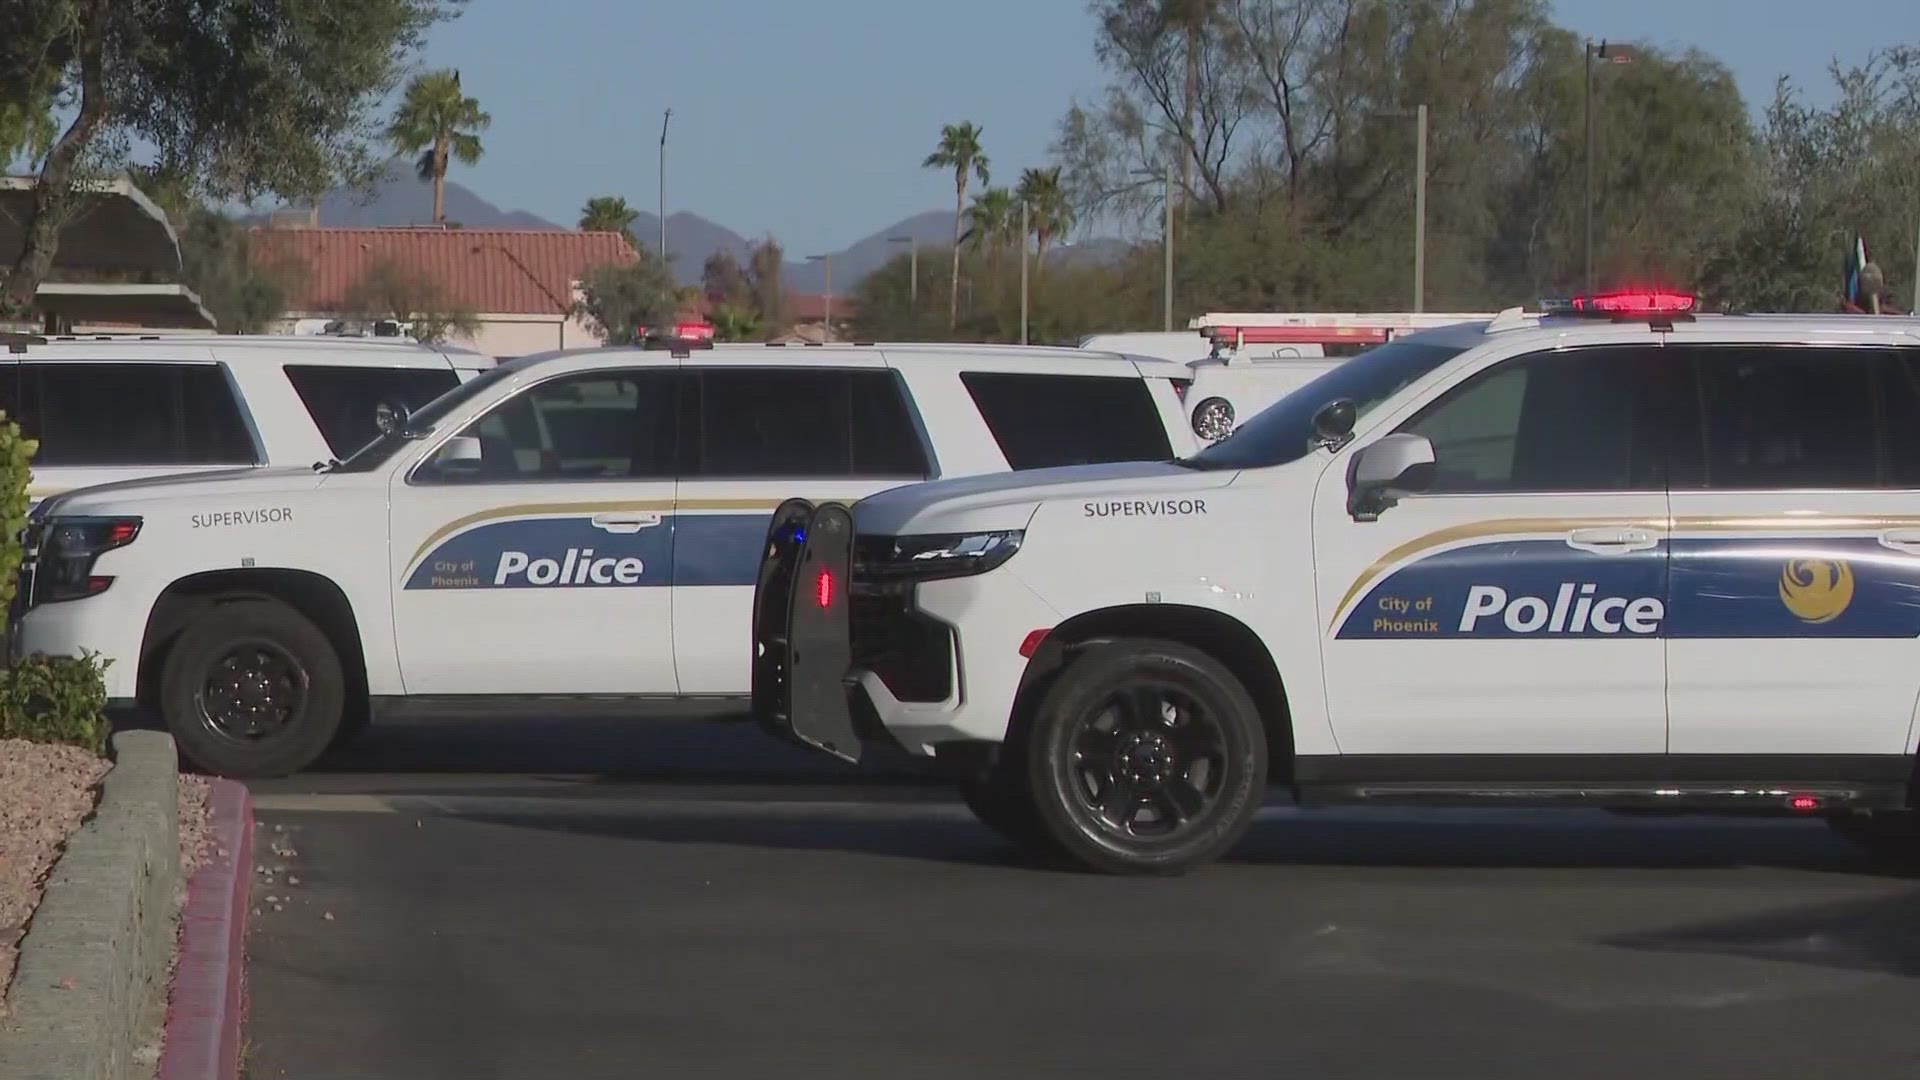 Officers attempted to stop the man for a possible DUI investigation when he grabbed a handgun from his car door, the Phoenix Police Department said.